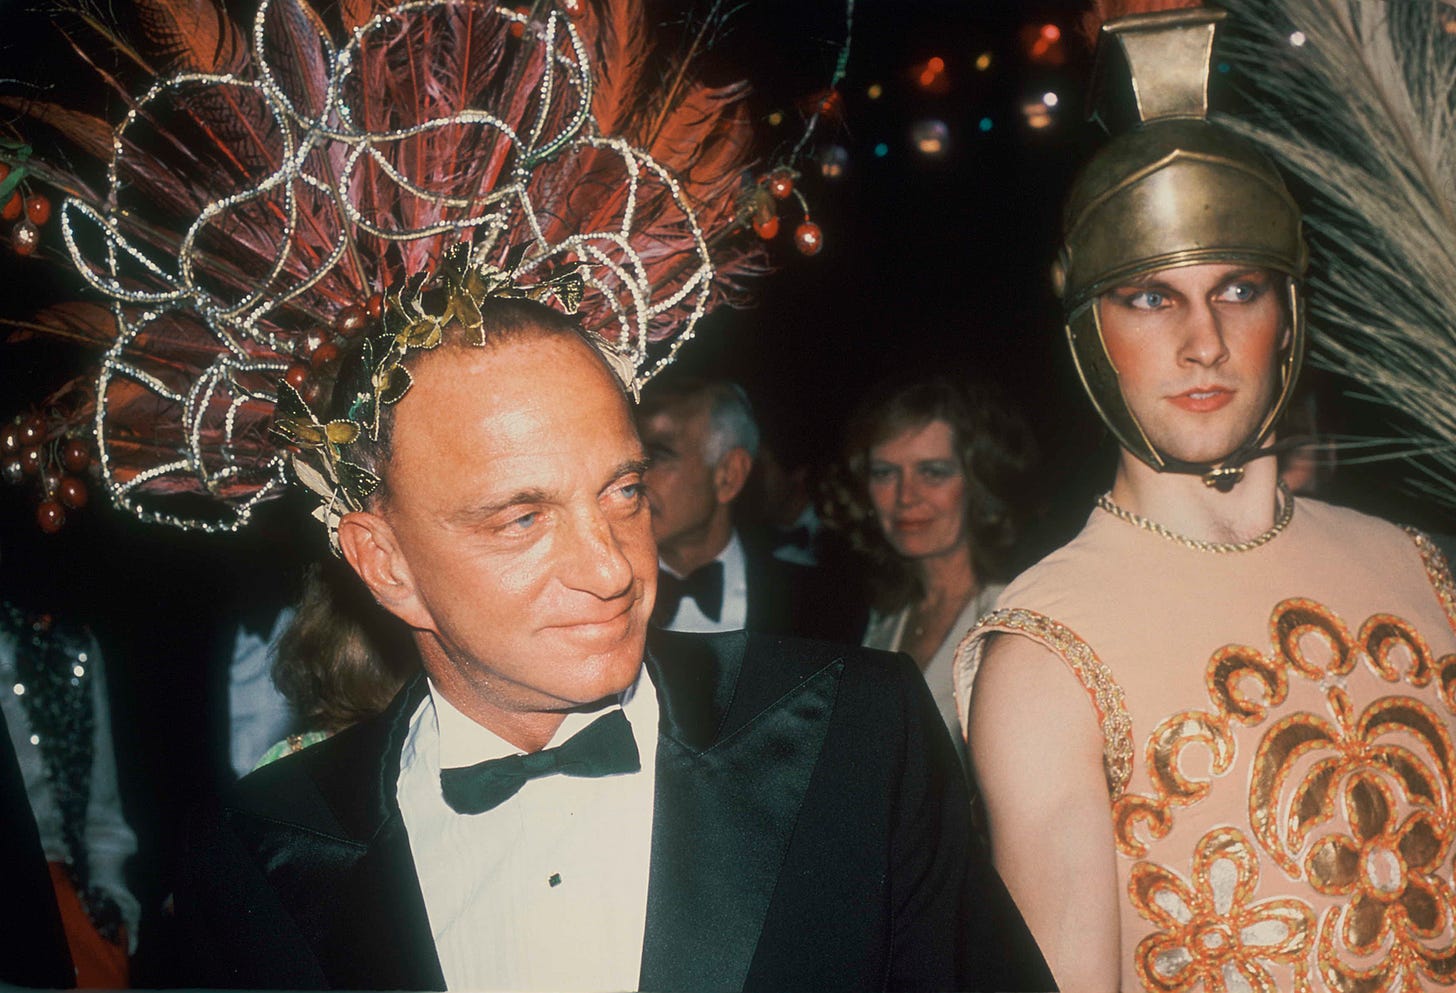 Where's My Roy Cohn? Digs into One of the 20th Century's Most Evil Men |  Vanity Fair